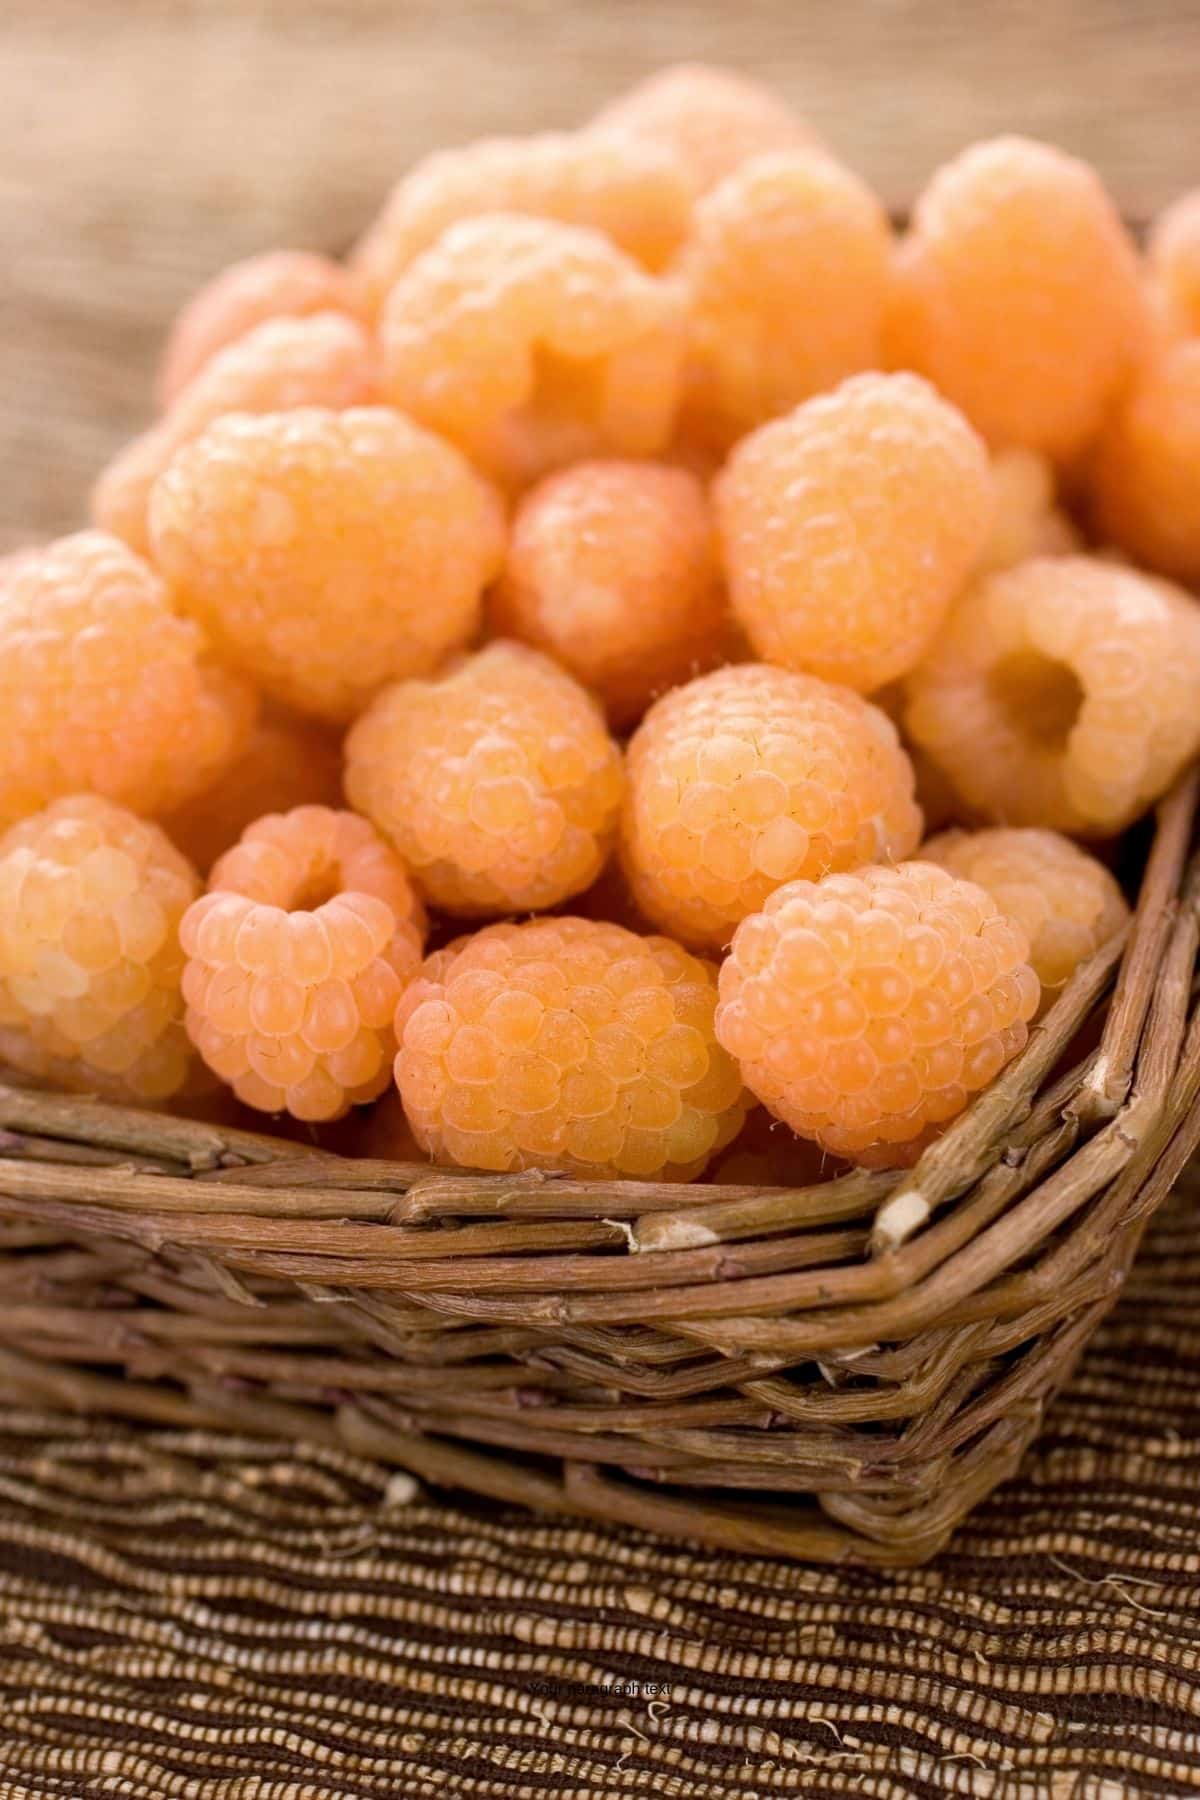 Golden raspberries in a woven basket on a table.